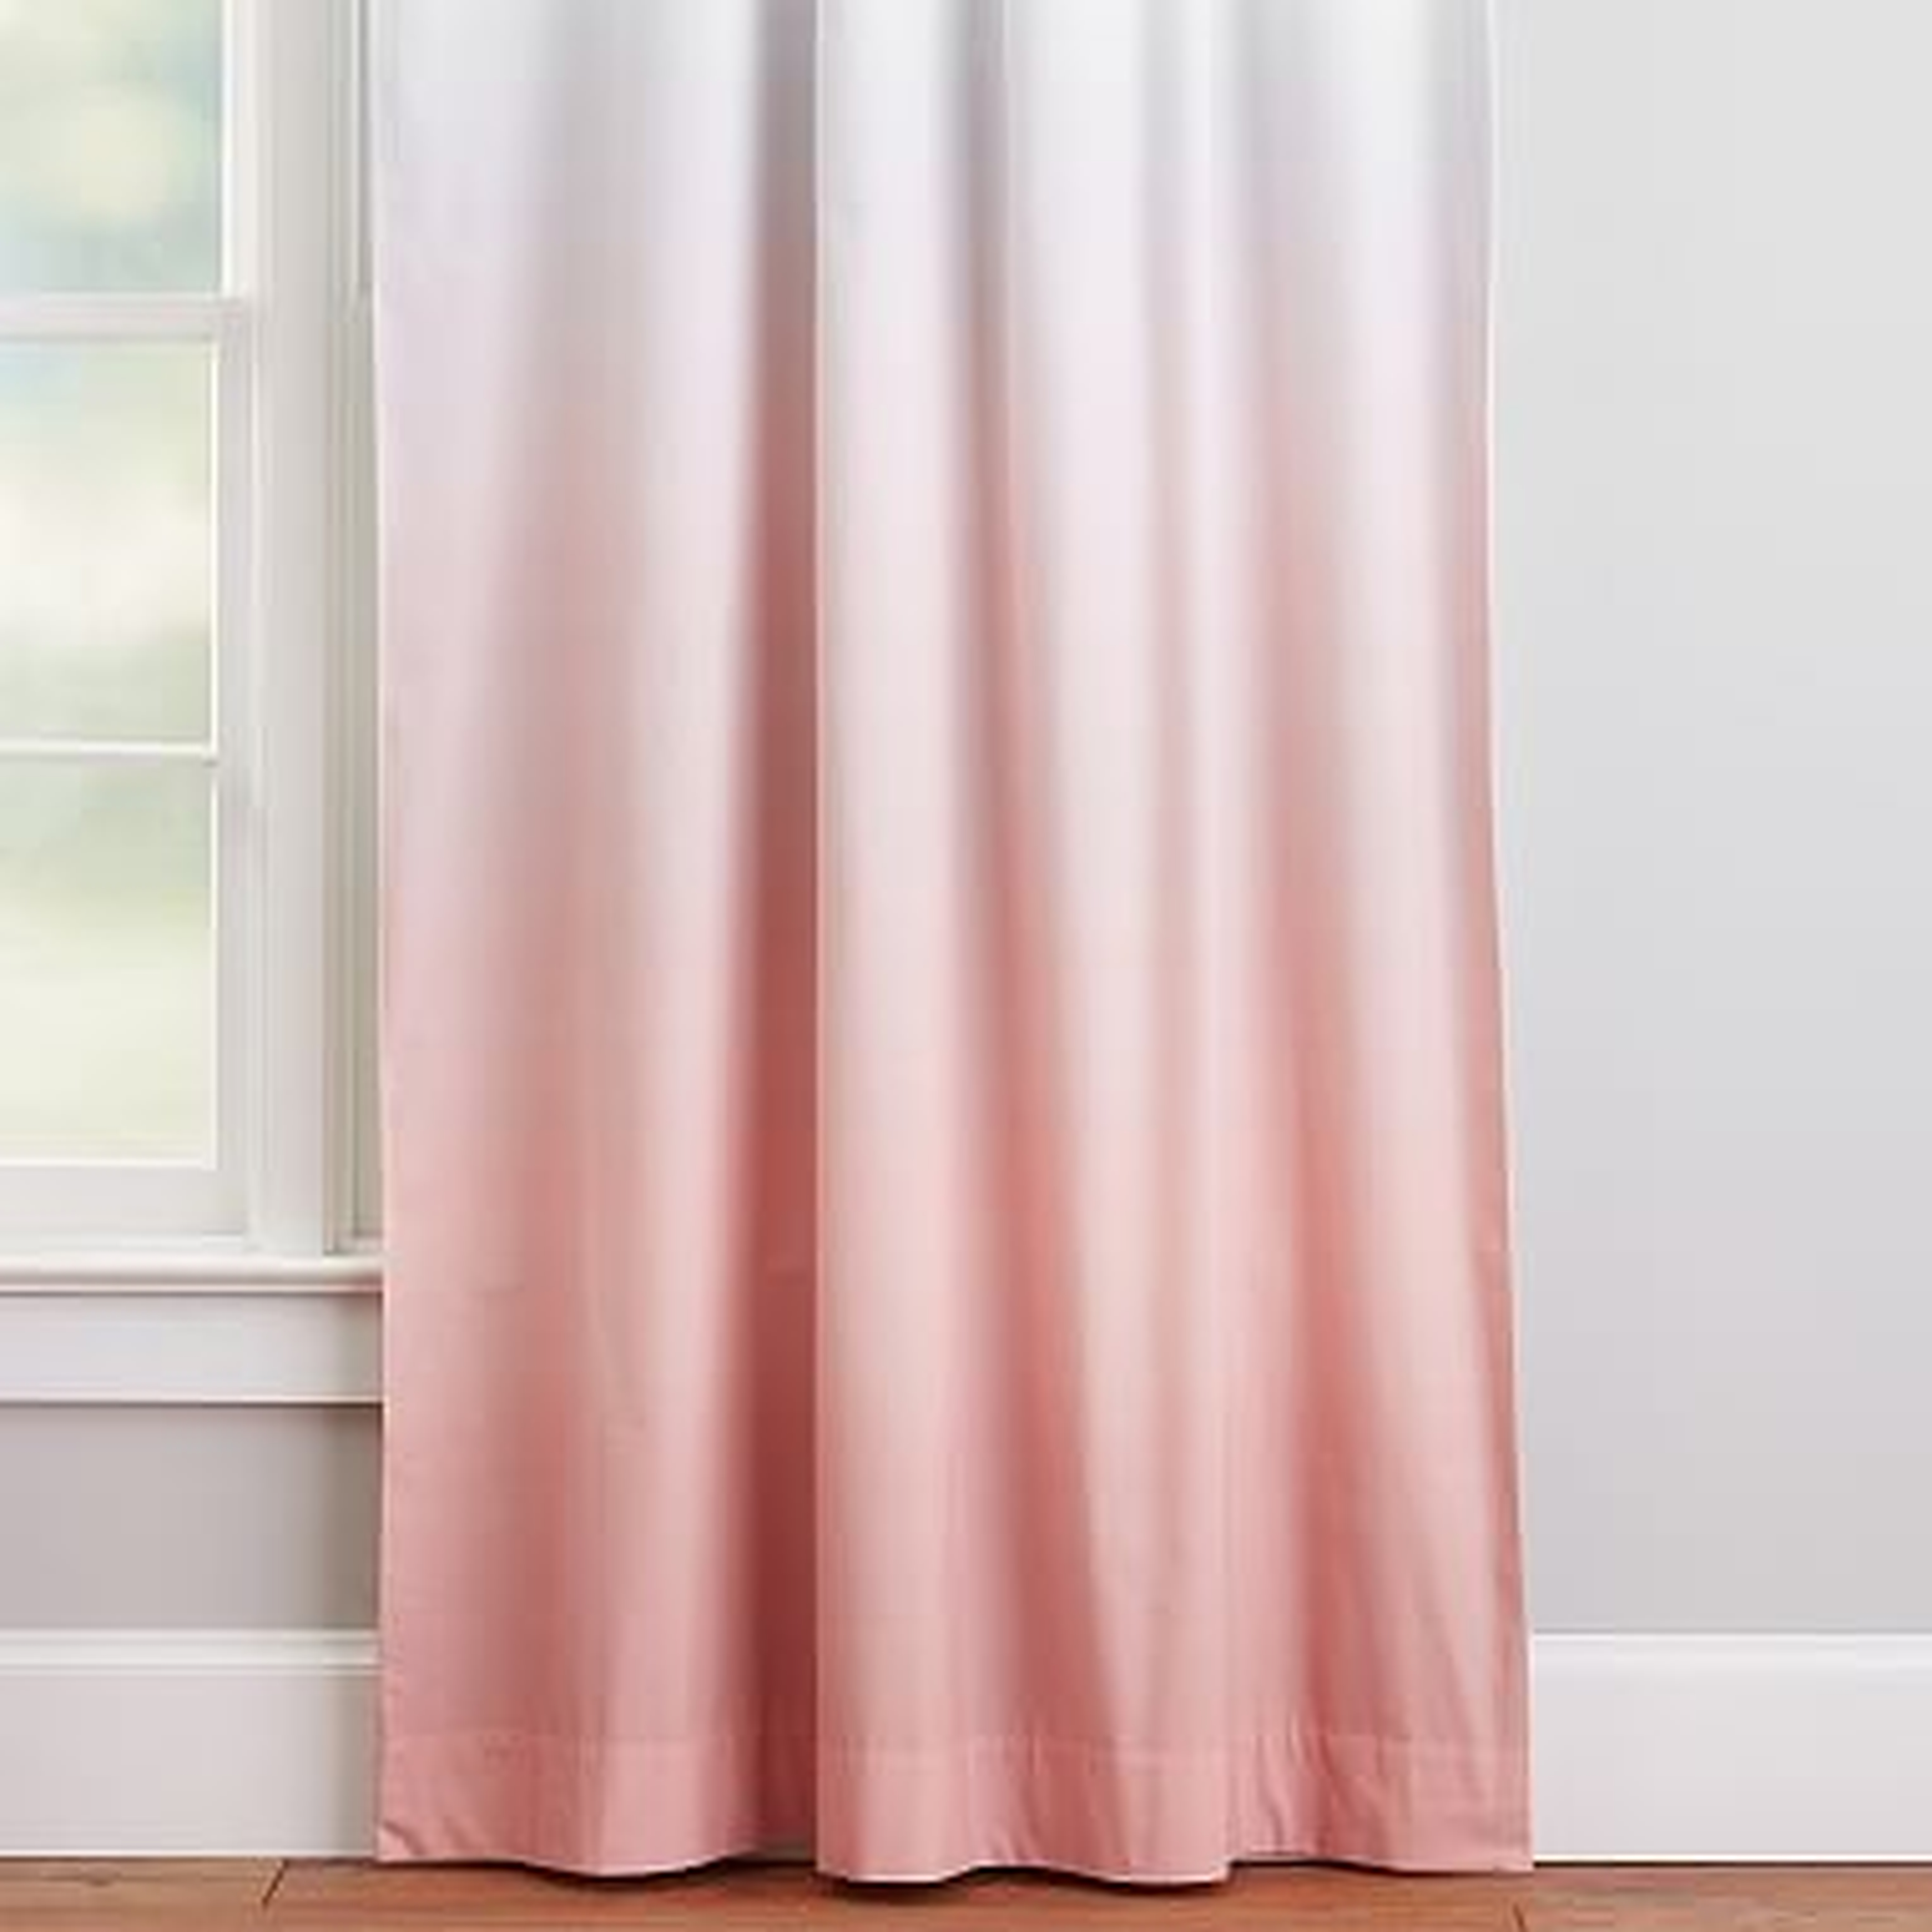 Ombre Blackout Curtain - Set of 2, 96", Blush - Pottery Barn Teen